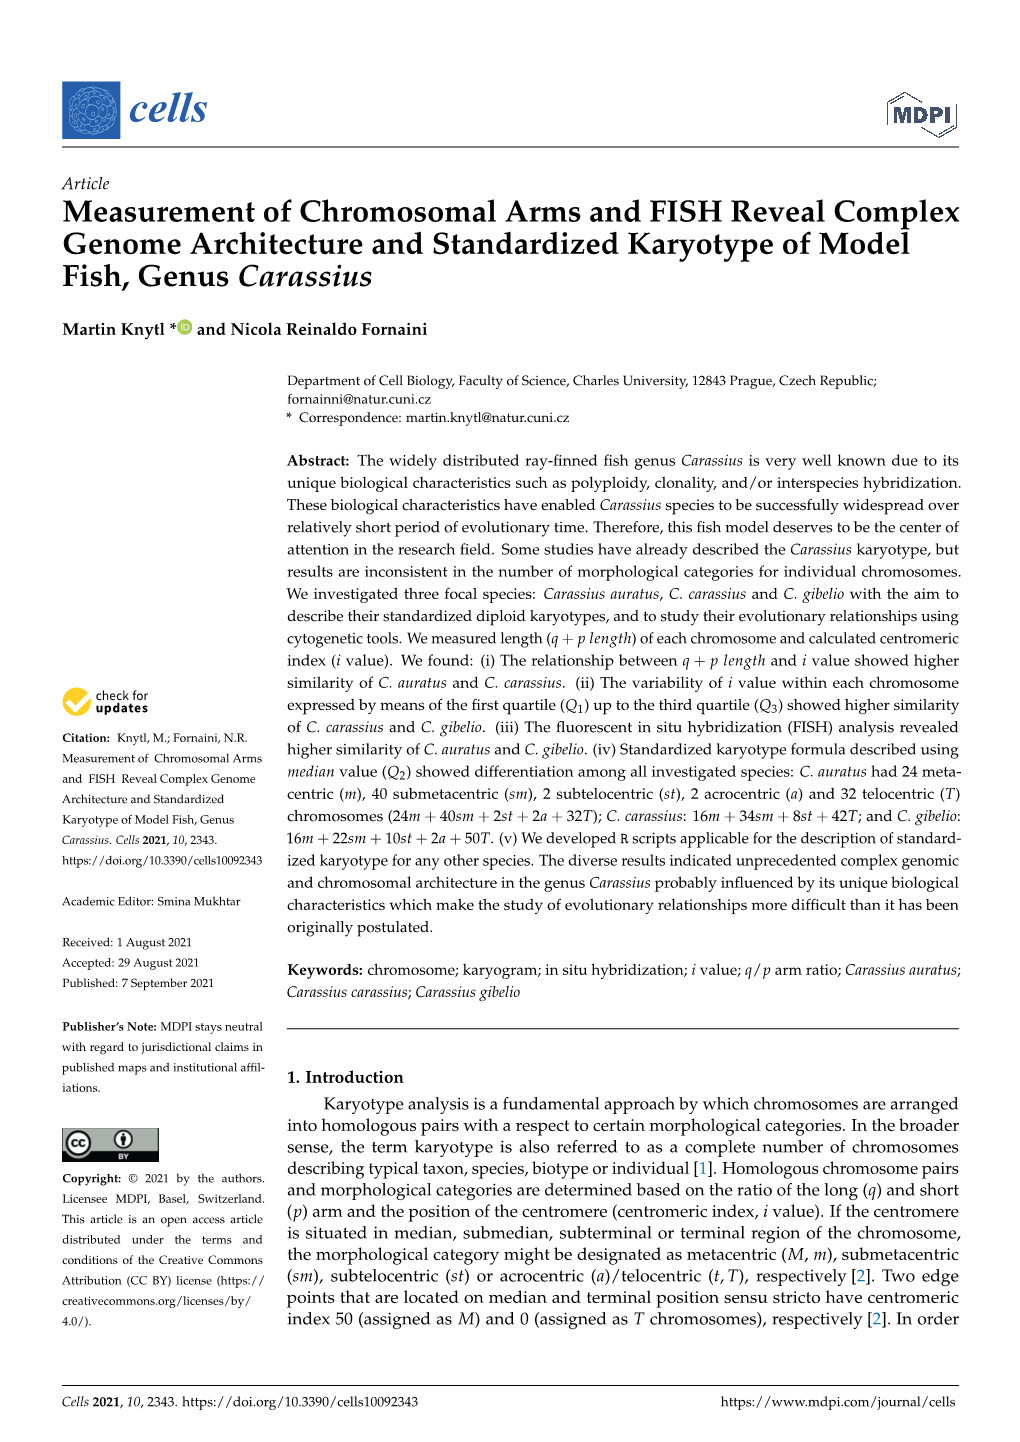 Measurement of Chromosomal Arms and FISH Reveal Complex Genome Architecture and Standardized Karyotype of Model Fish, Genus Carassius